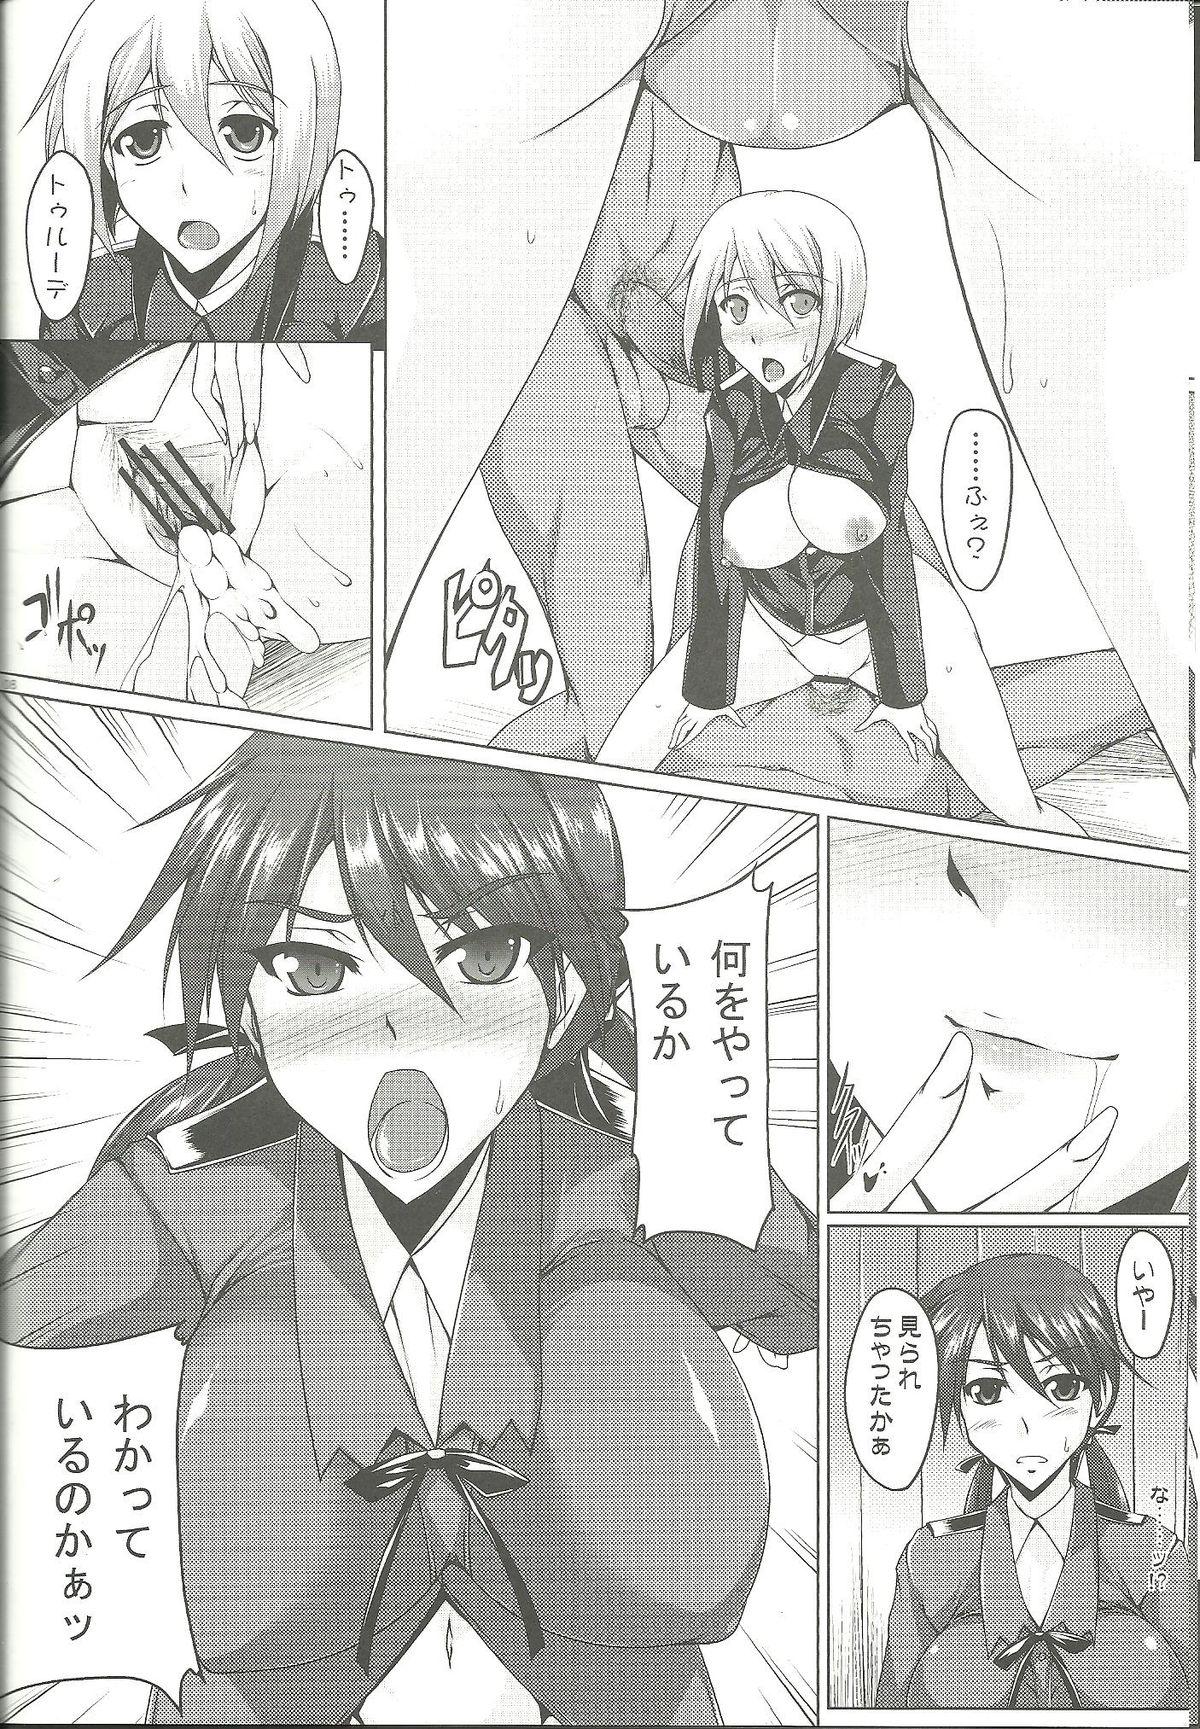 Hot Naked Women Booby Trap - Strike witches Facebook - Page 7